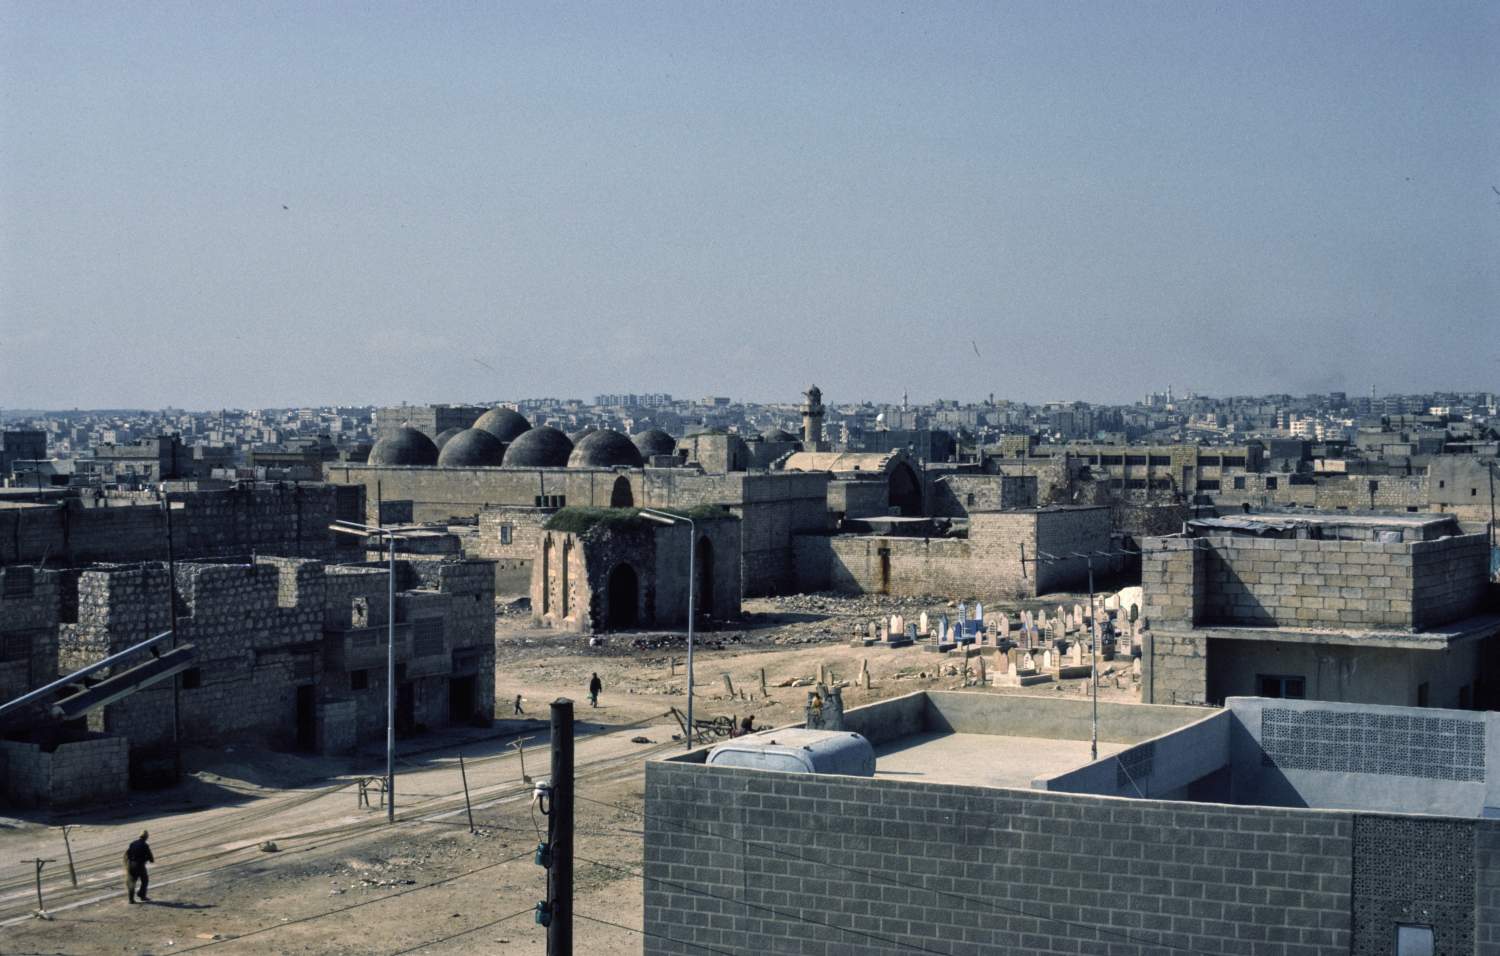 Madrasa al-Firdaws - Distant view from northeast, showing cemetery in foreground.